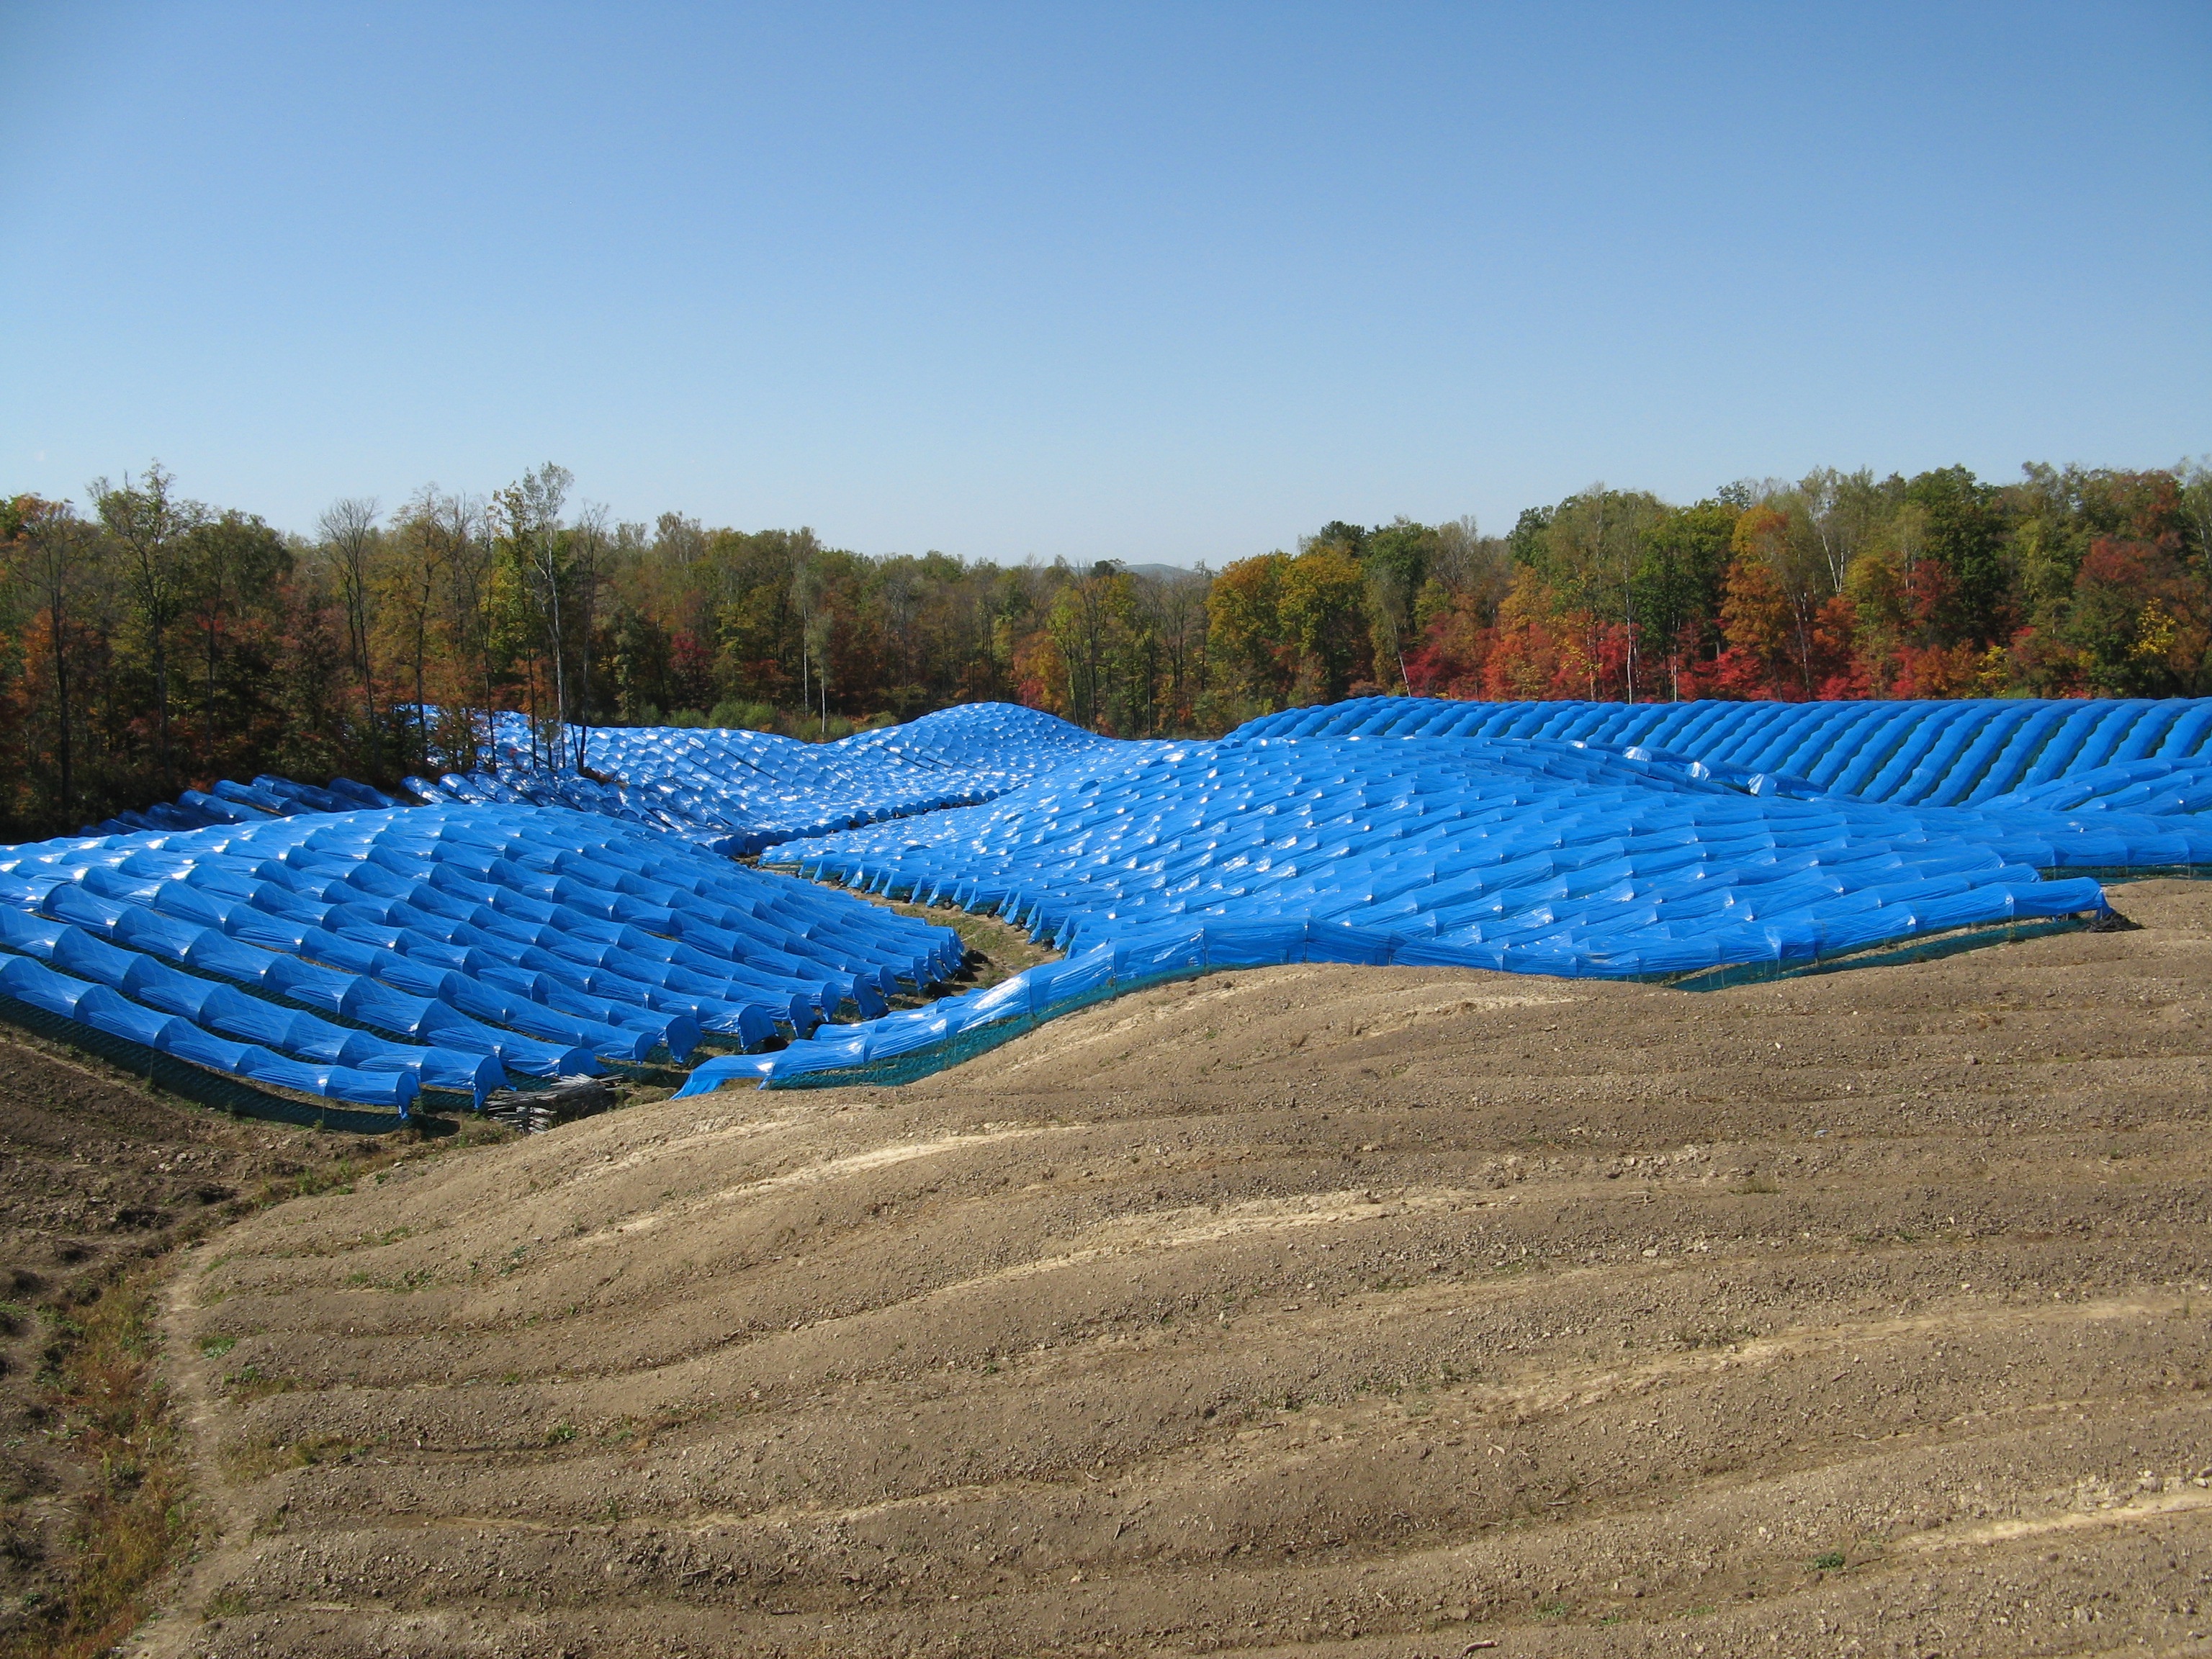 Hoop houses made from blue plastic shade red ginseng in a field in China